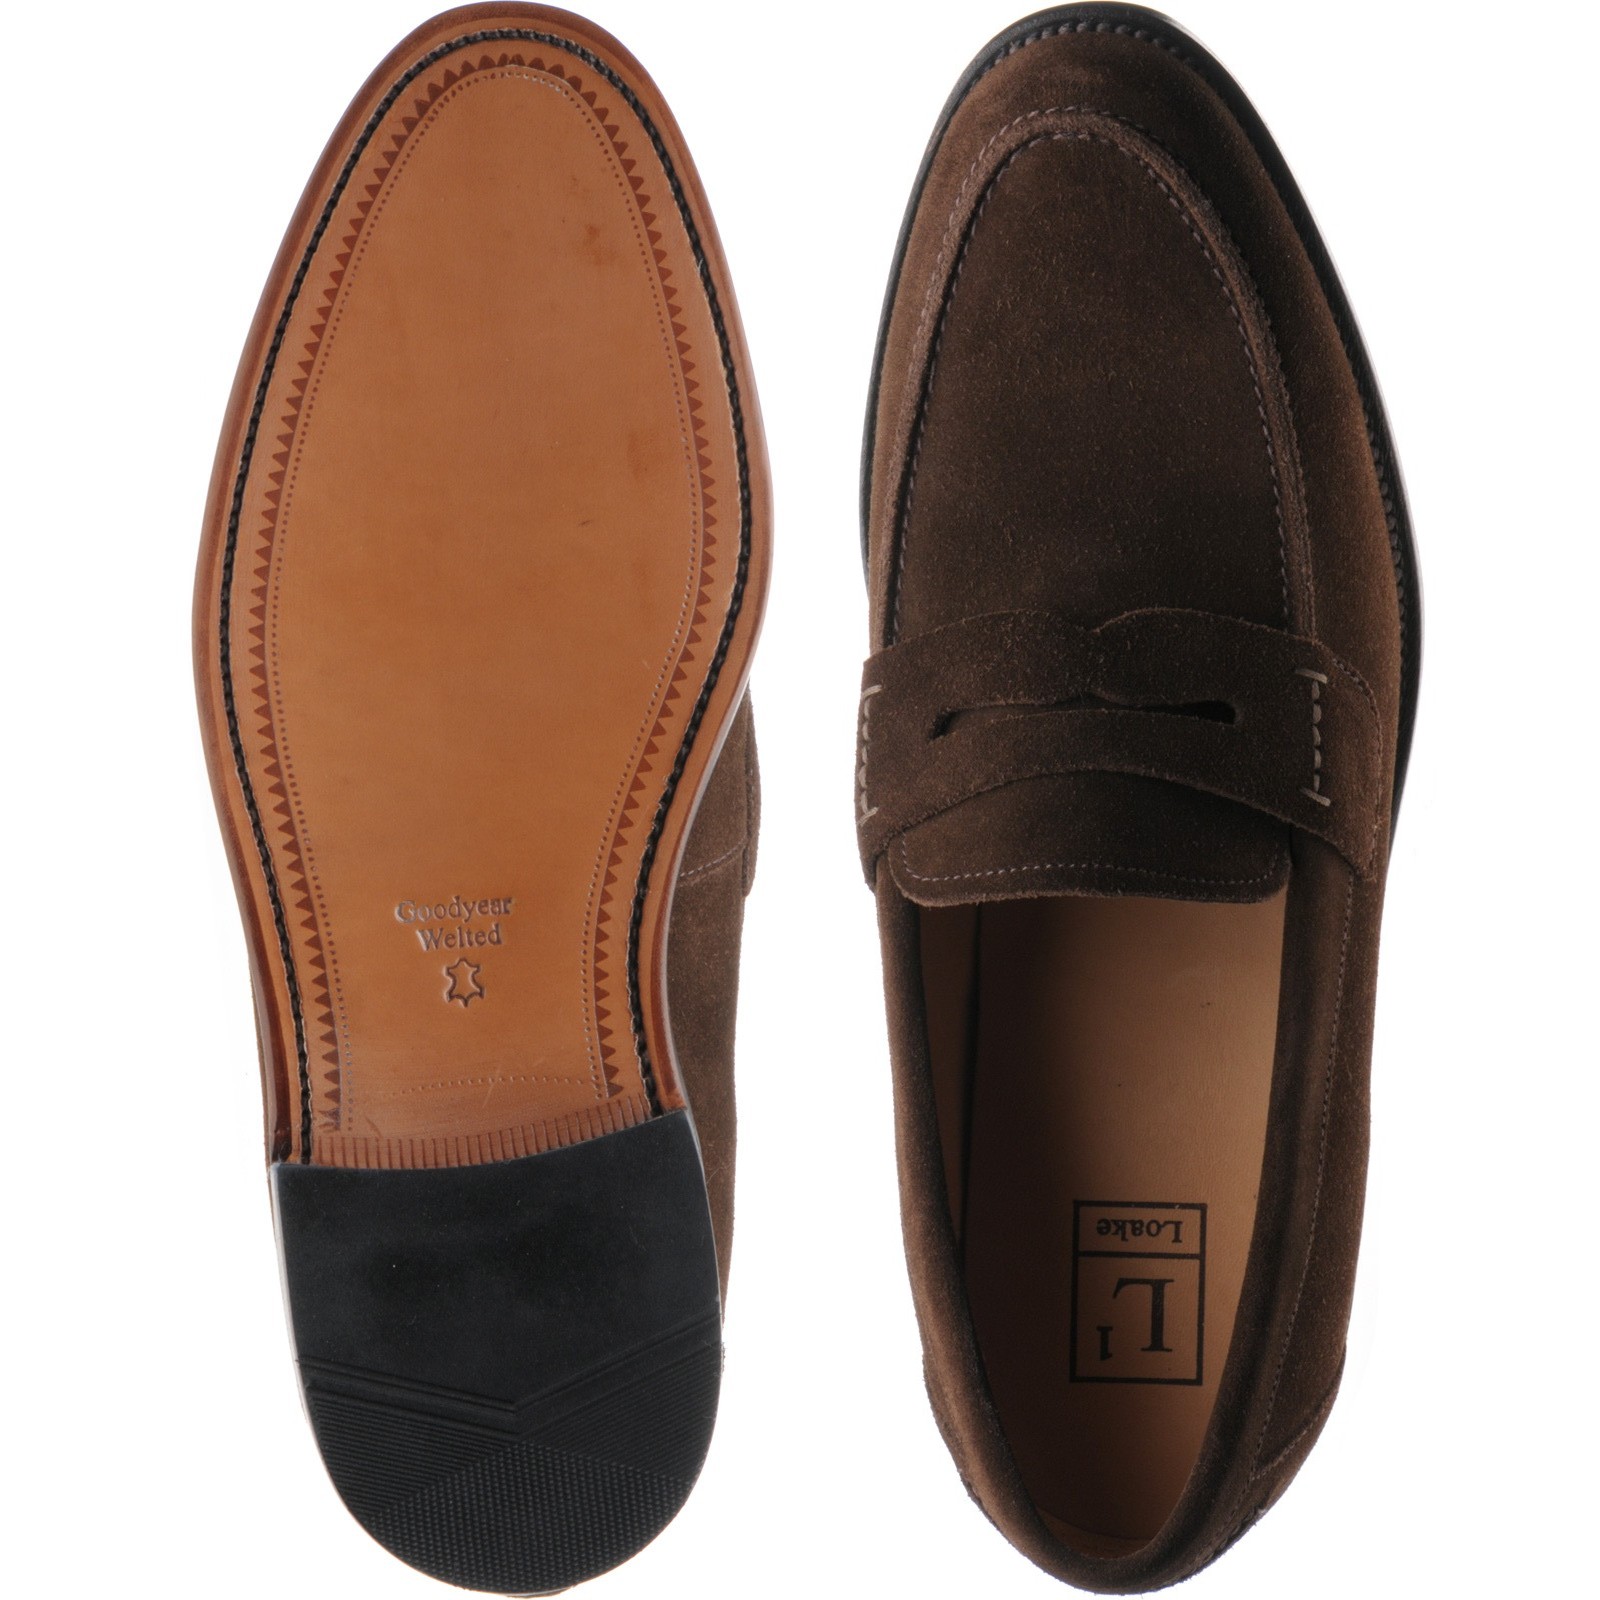 Loake shoes | Loake 1 | 256 loafers in Brown Suede at Herring Shoes